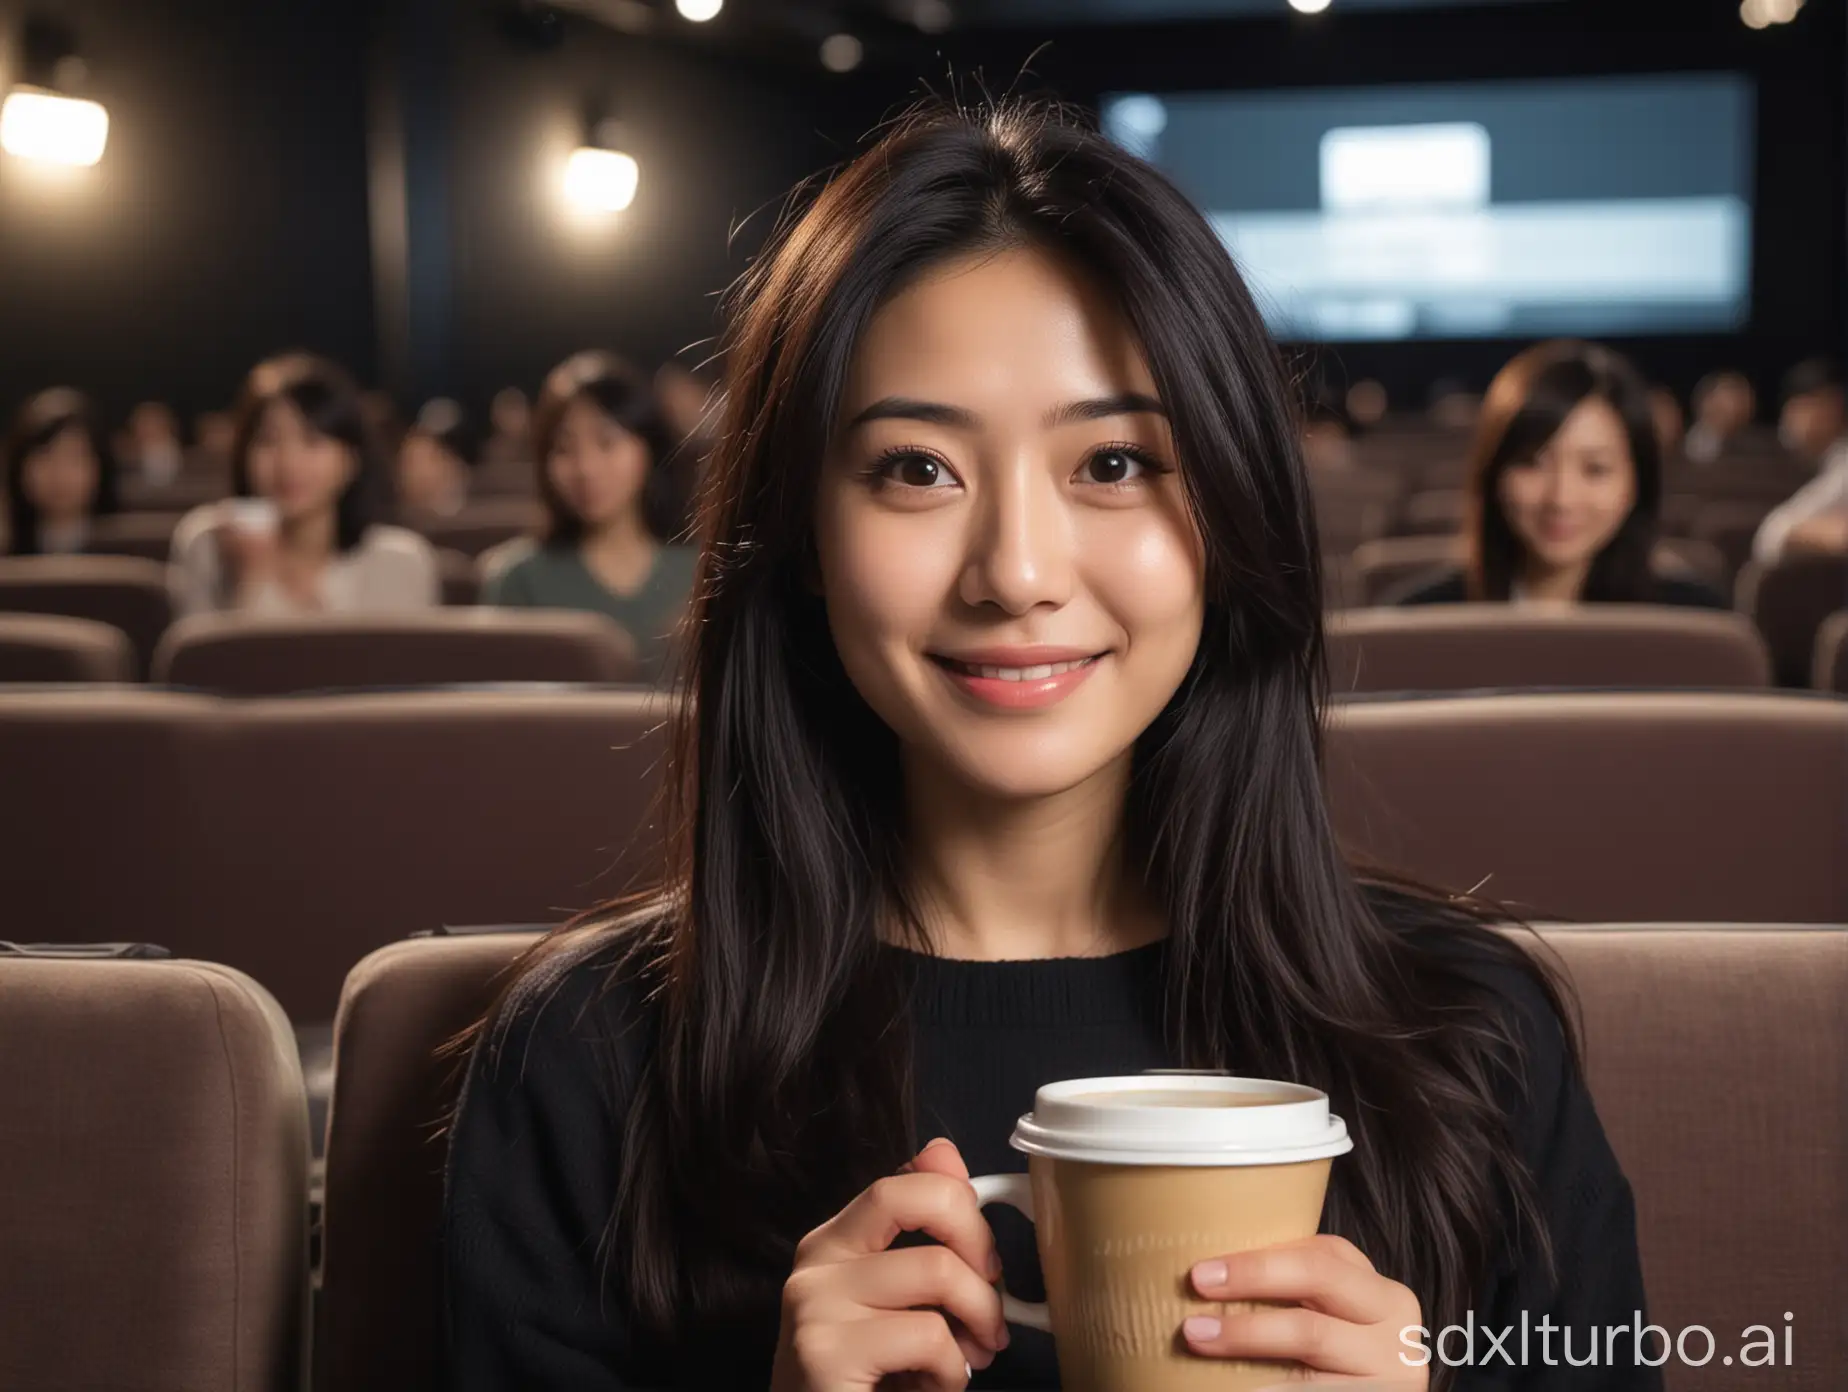 beautiful intellectual typical Japanese 33-year-old girl is in a theatre watching a movie with a cup of coffee, dark setting, smiling, some viewers in background, Instagram model, long black hair, warm, height 6.5 feets, female, masterpiece, 4k, correct fingers or hands